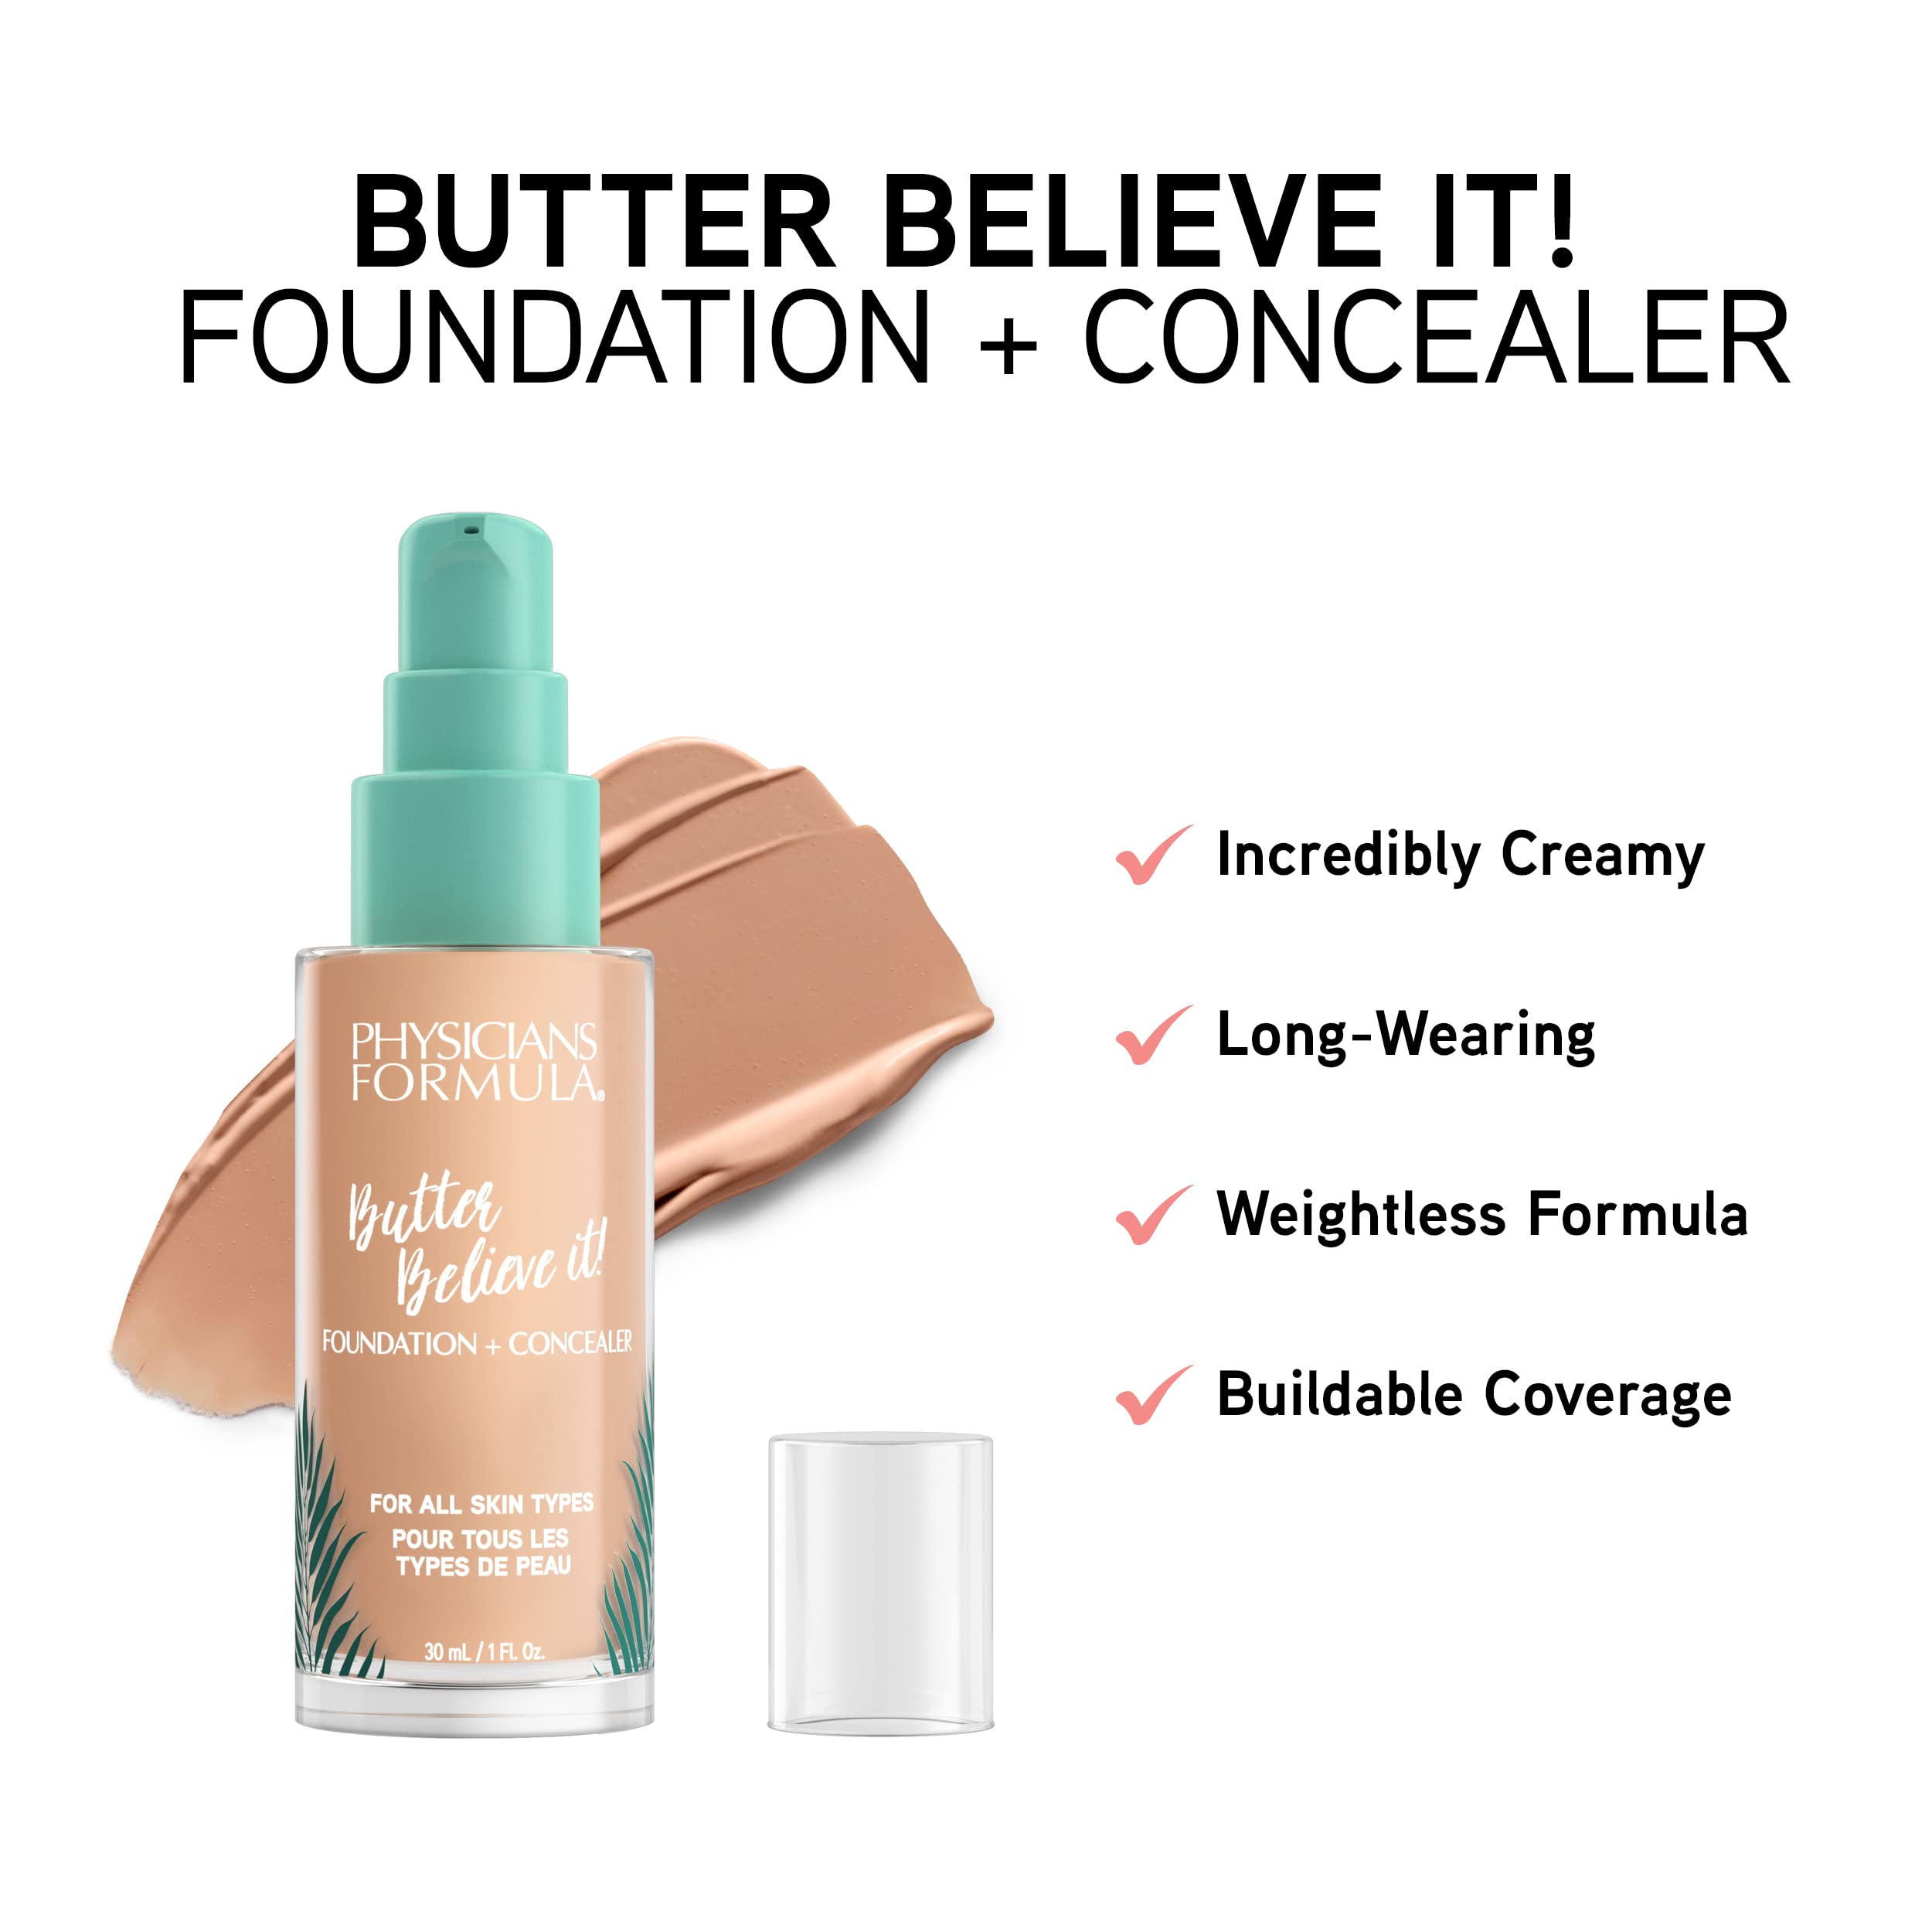 Physicians Formula Butter Believe It! Foundation + Concealer Light | Dermatologist Tested, Clinicially Tested